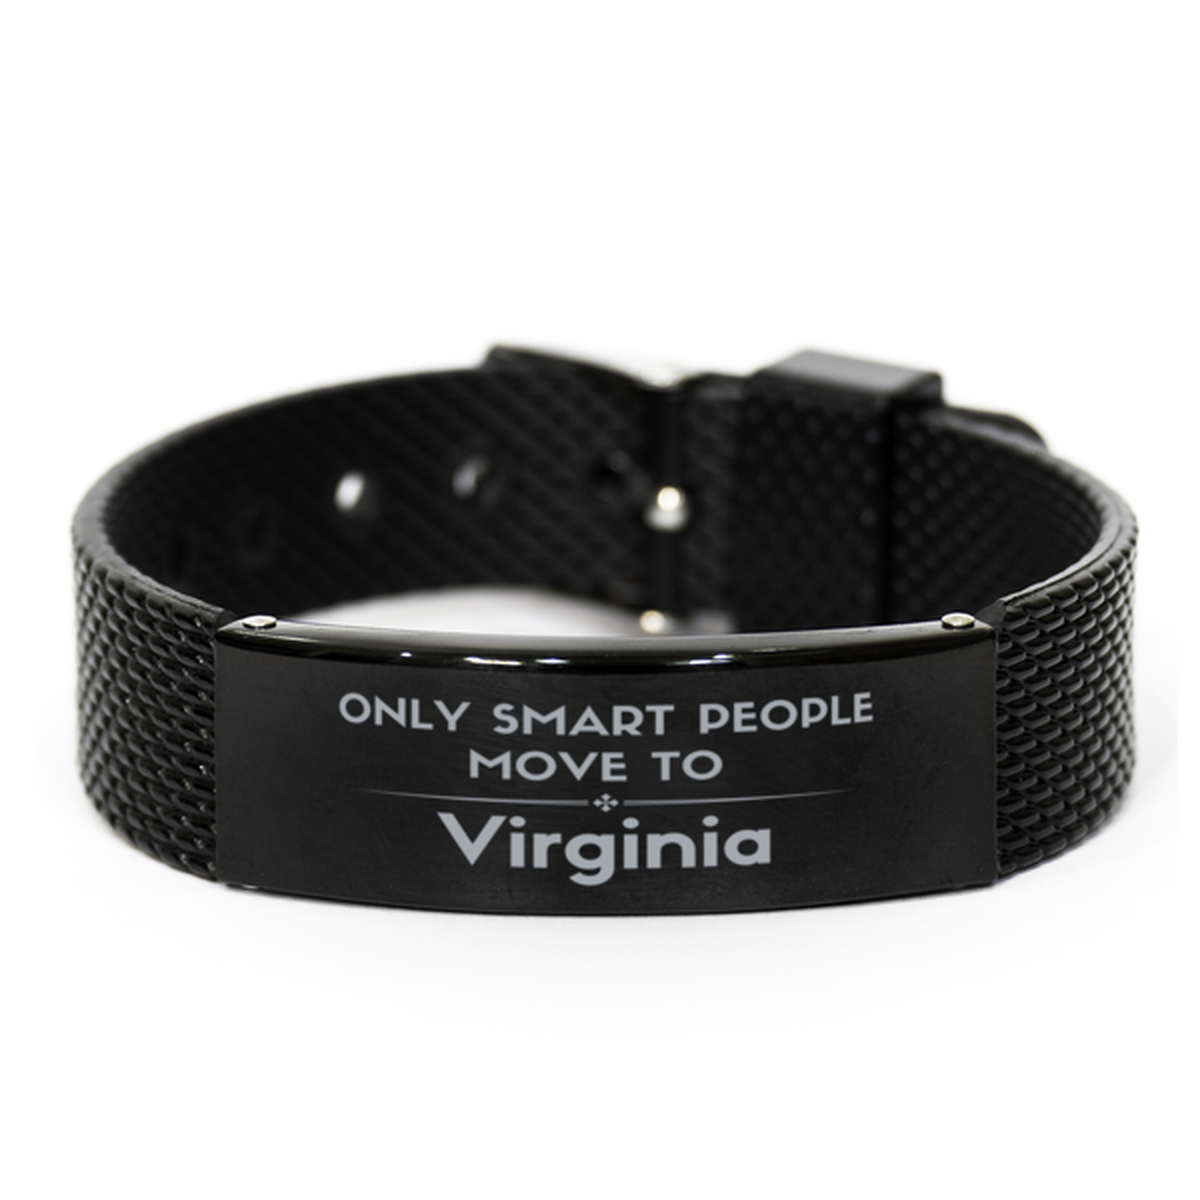 Only smart people move to Virginia Black Shark Mesh Bracelet, Gag Gifts For Virginia, Move to Virginia Gifts for Friends Coworker Funny Saying Quote